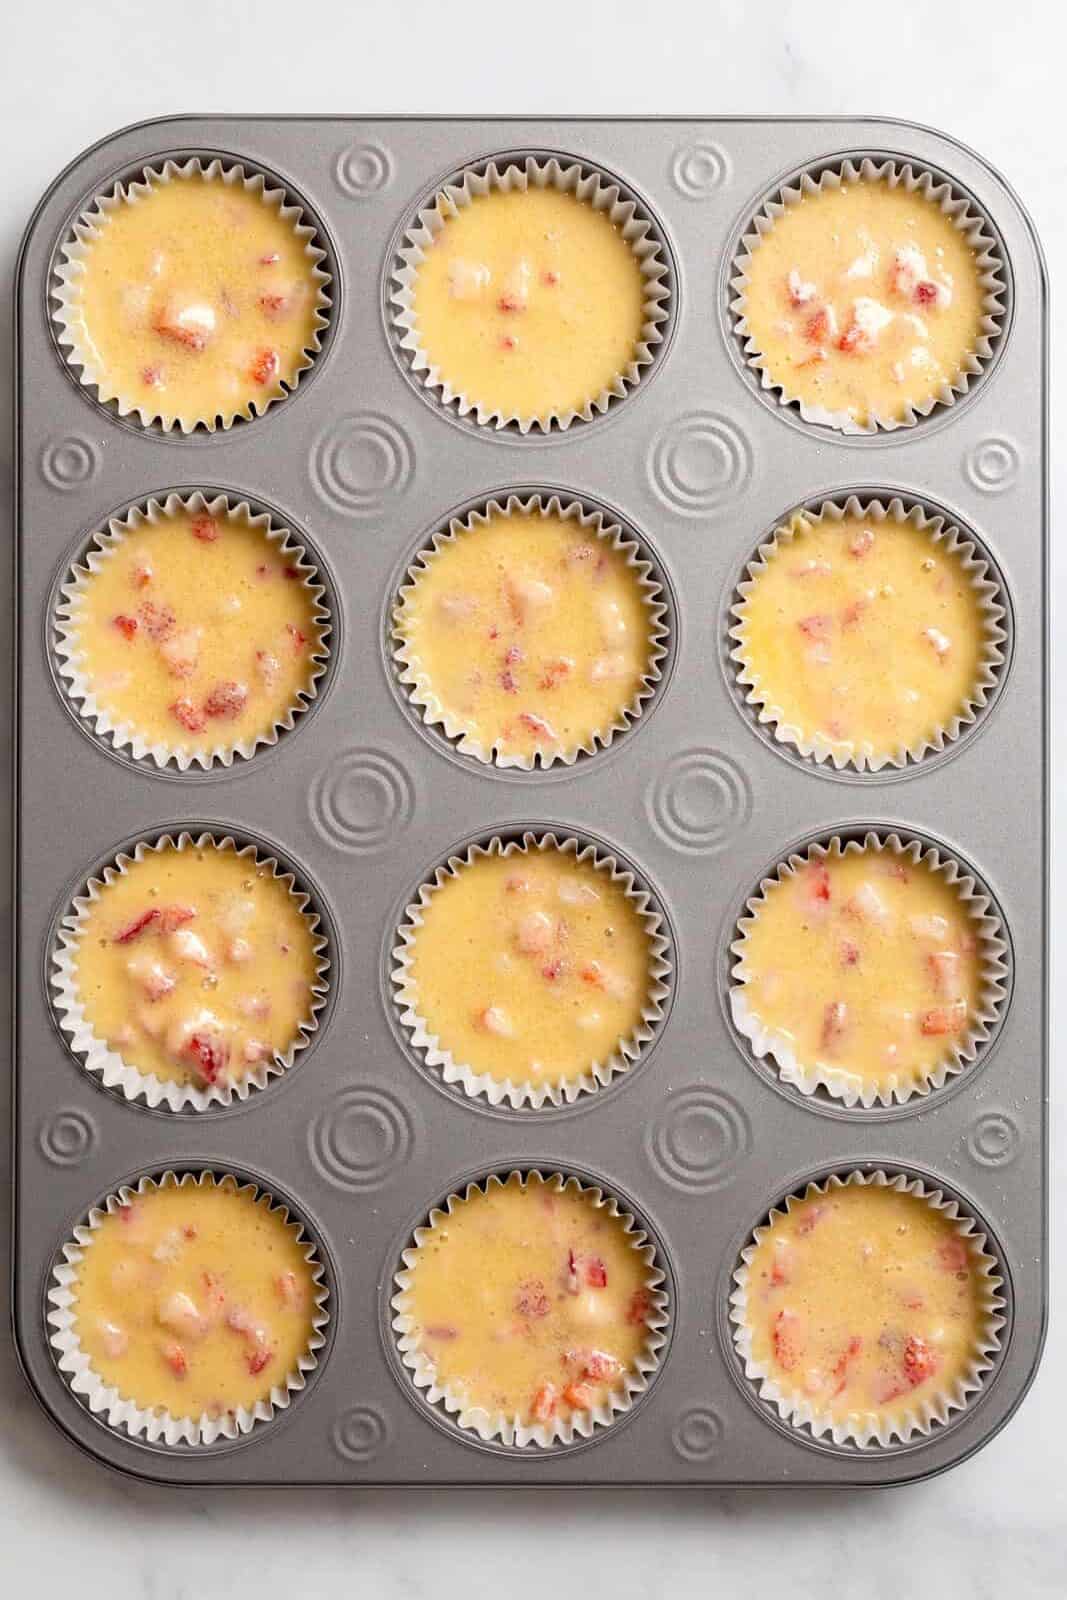 Top down image of a 12 count muffin tin lined with strawberry muffin batter.